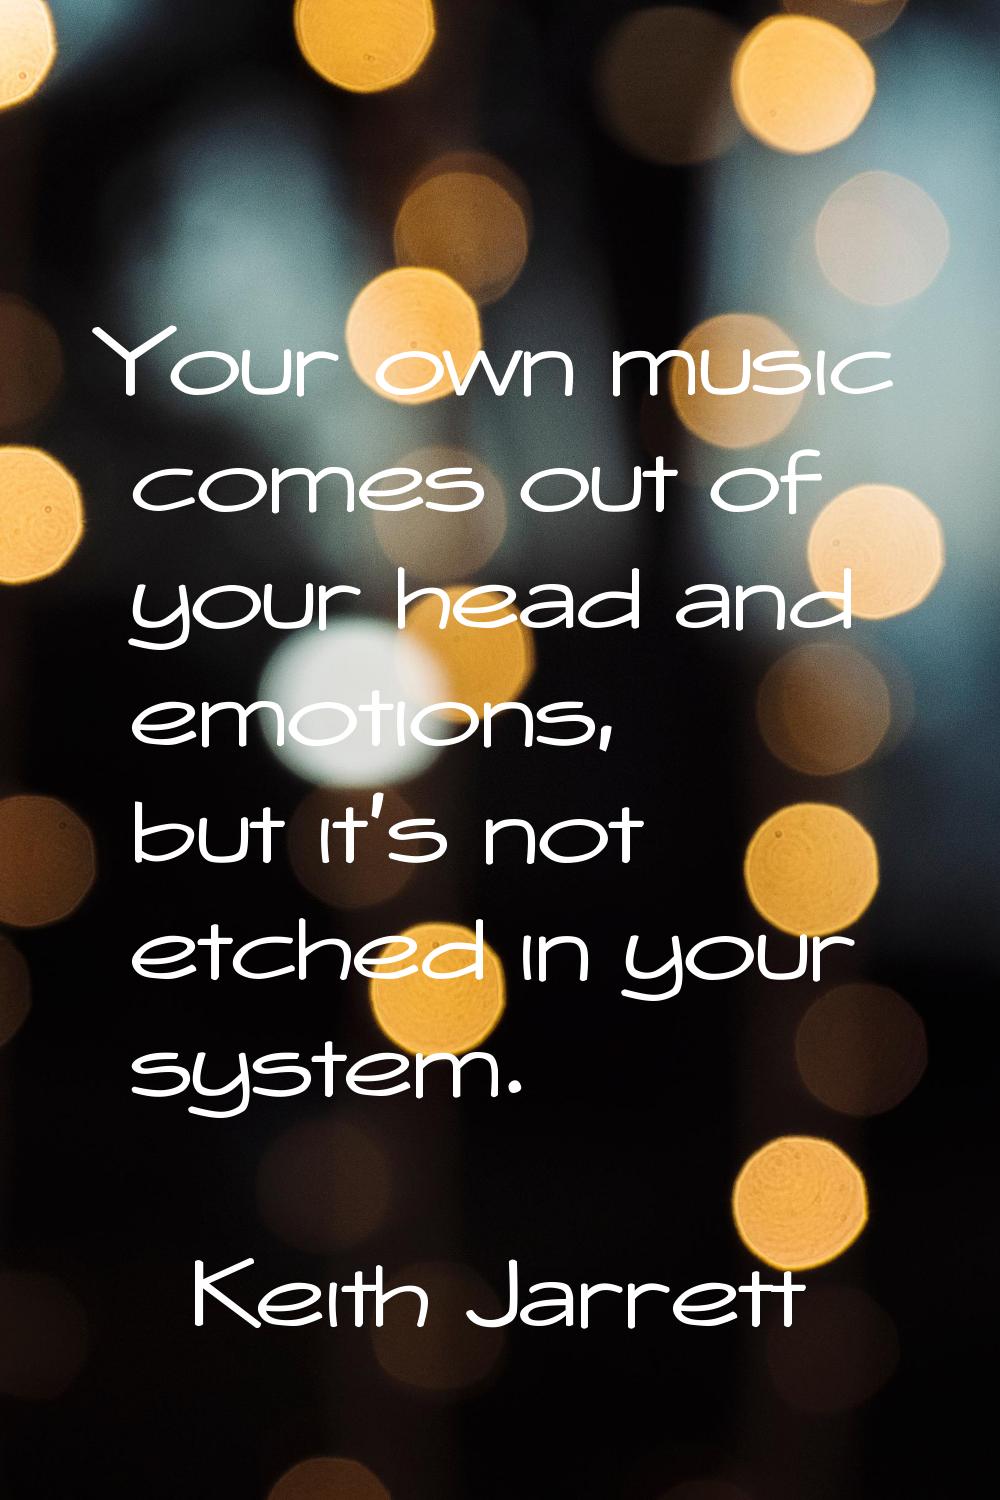 Your own music comes out of your head and emotions, but it's not etched in your system.